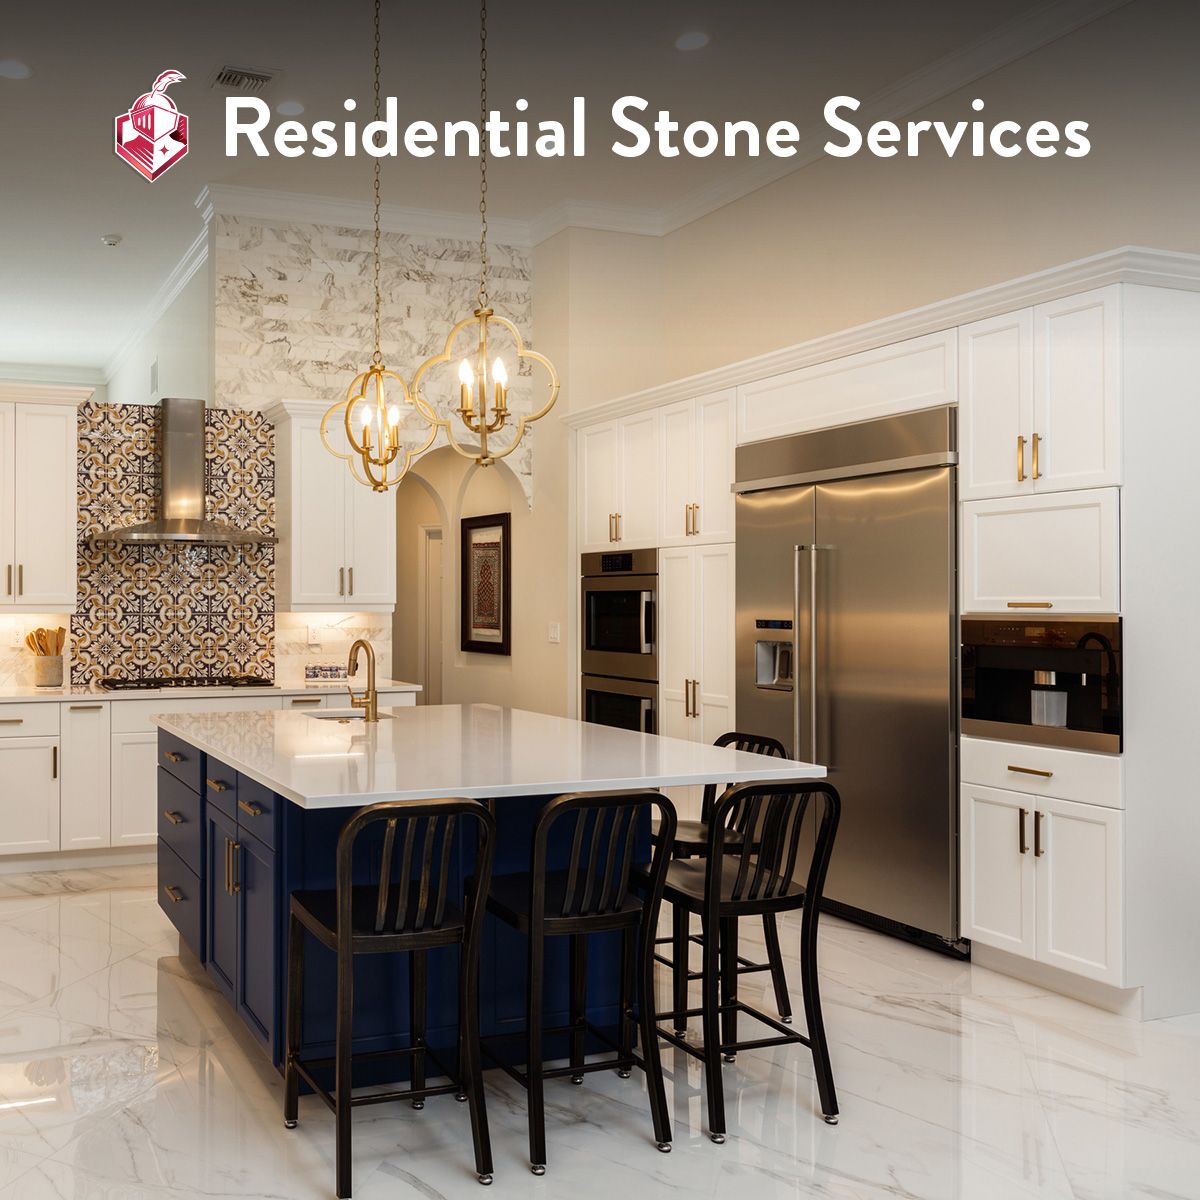 Residential Stone Services